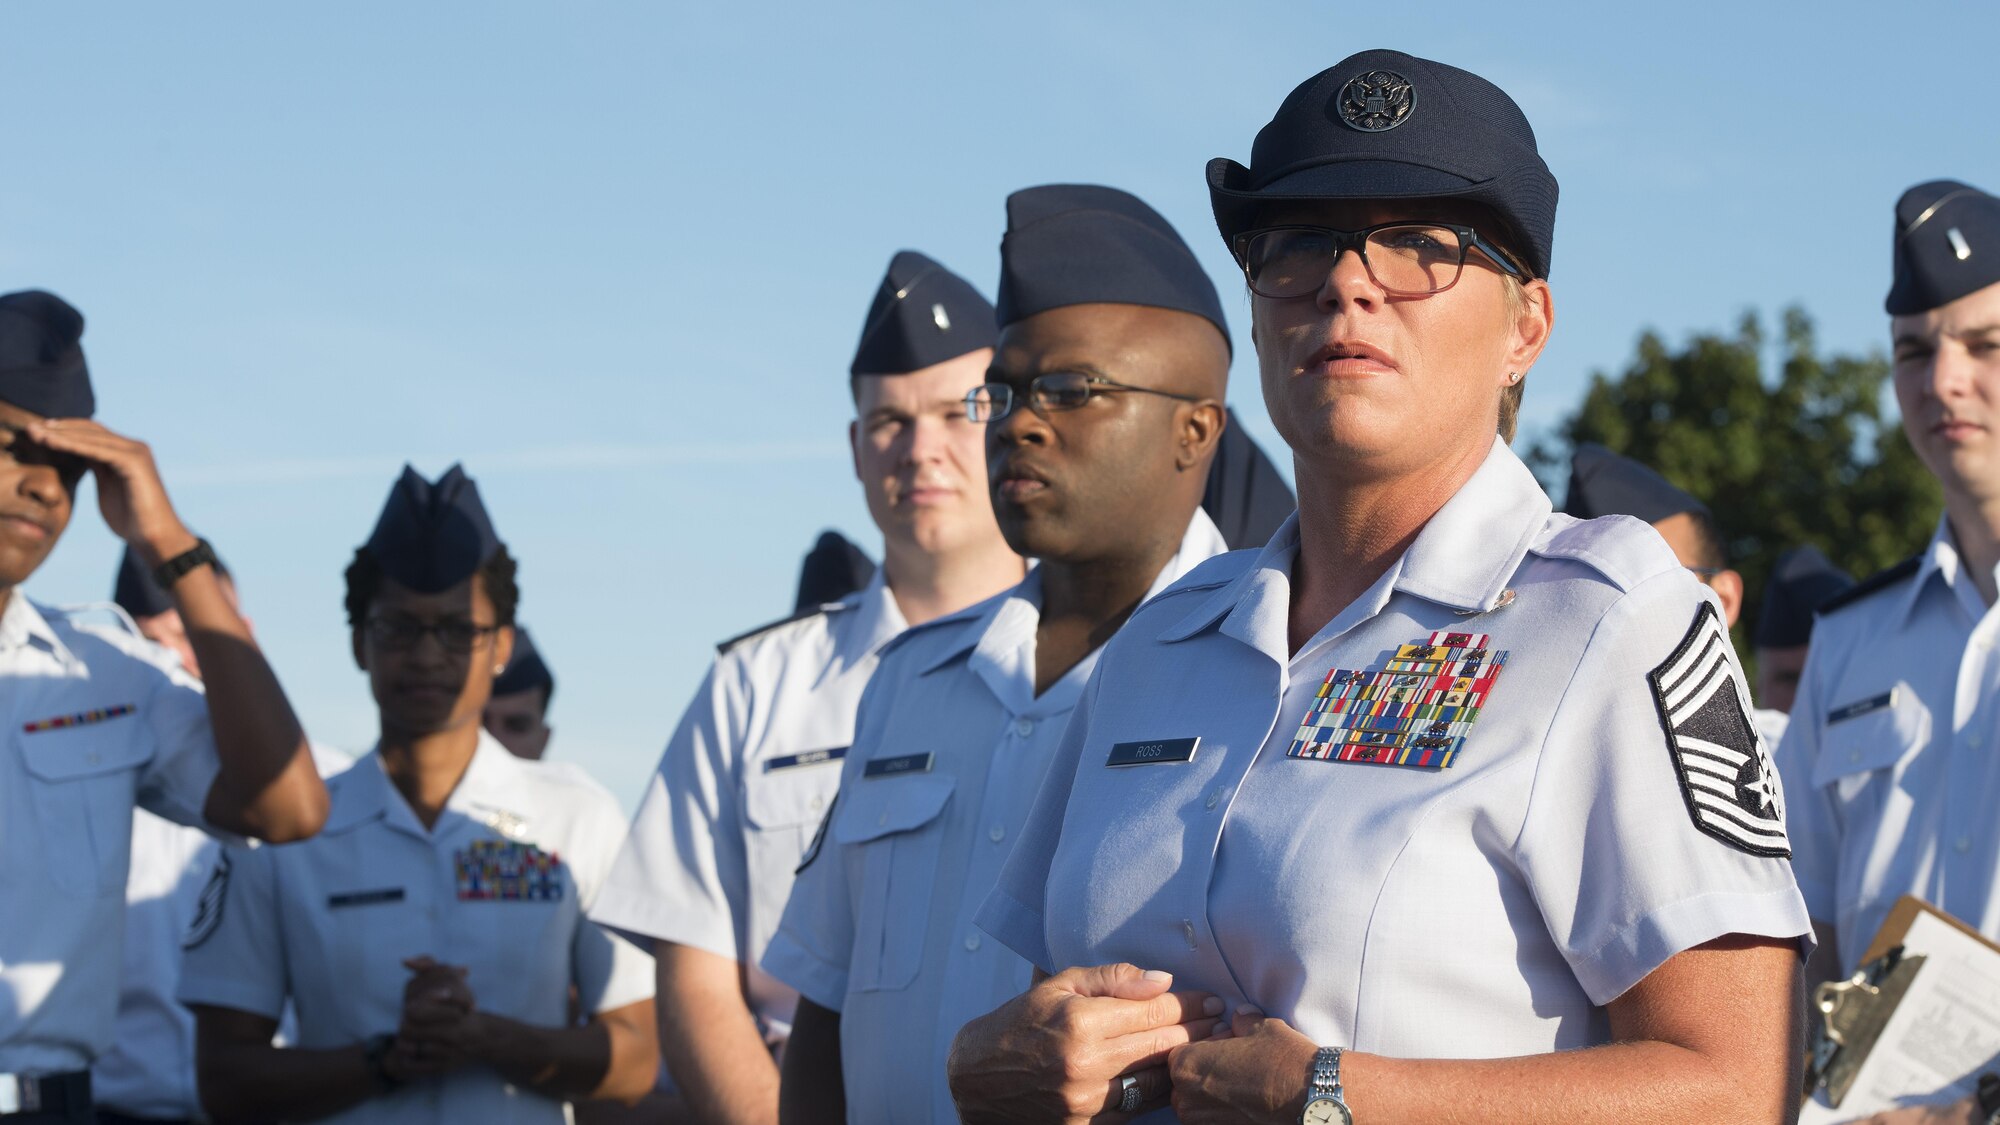 Chief Master Sgt. Kathleen Ross, 436th Logistics Readiness Squadron superintendent, speaks to LRS Airmen after the completion of an open-ranks inspection Aug. 17, 2016, on Dover Air Force Base, Del. Squadron superintendents provide leadership, management and guidance in organizing, equipping, training, and mobilizing the group to meet home station and expeditionary mission requirements. (U.S. Air Force photo/Senior Airman Zachary Cacicia)